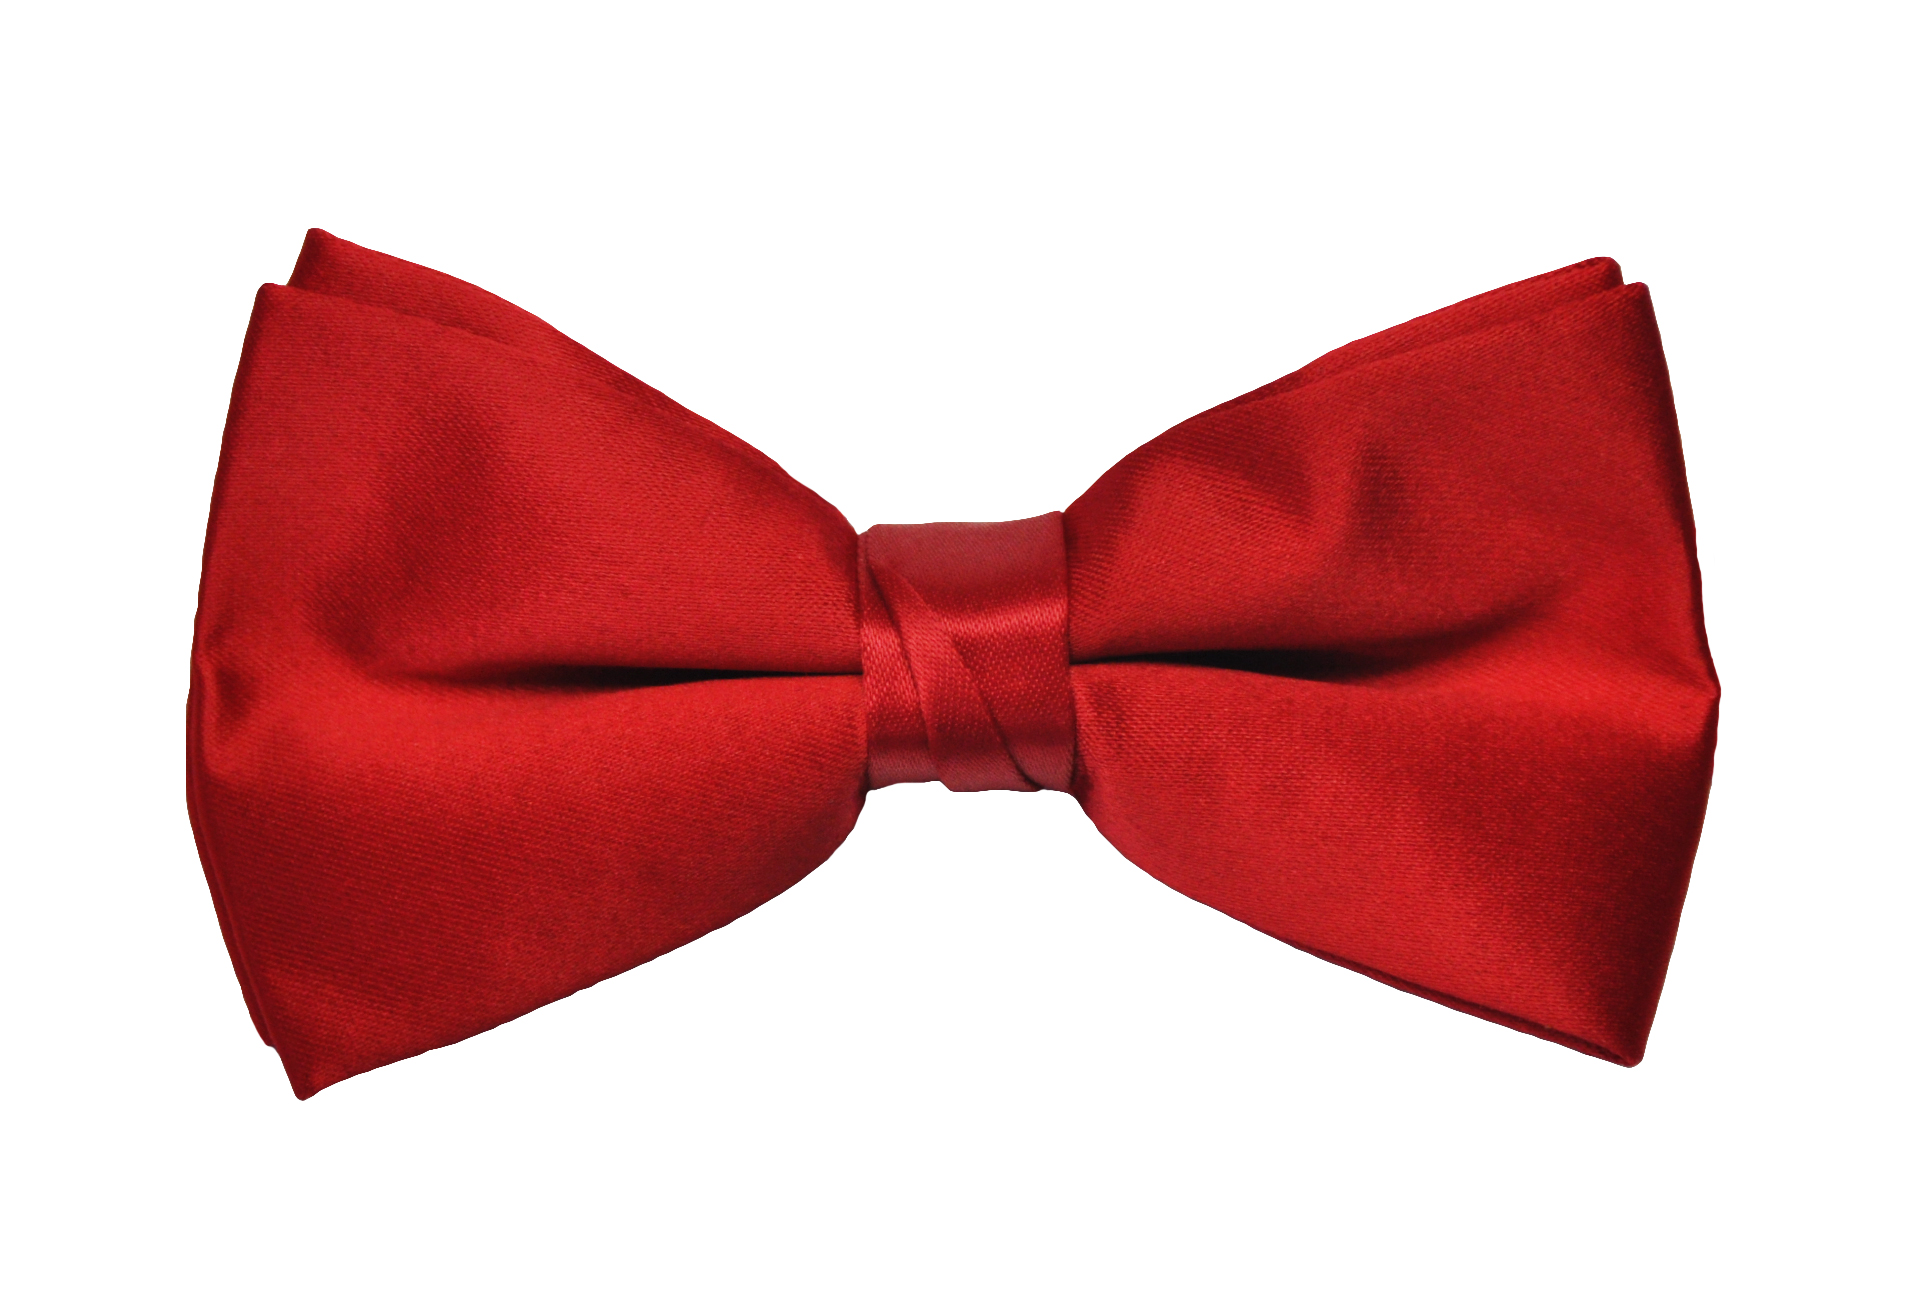 Red Dr Who Bow Ties Clipart - ClipArt Best